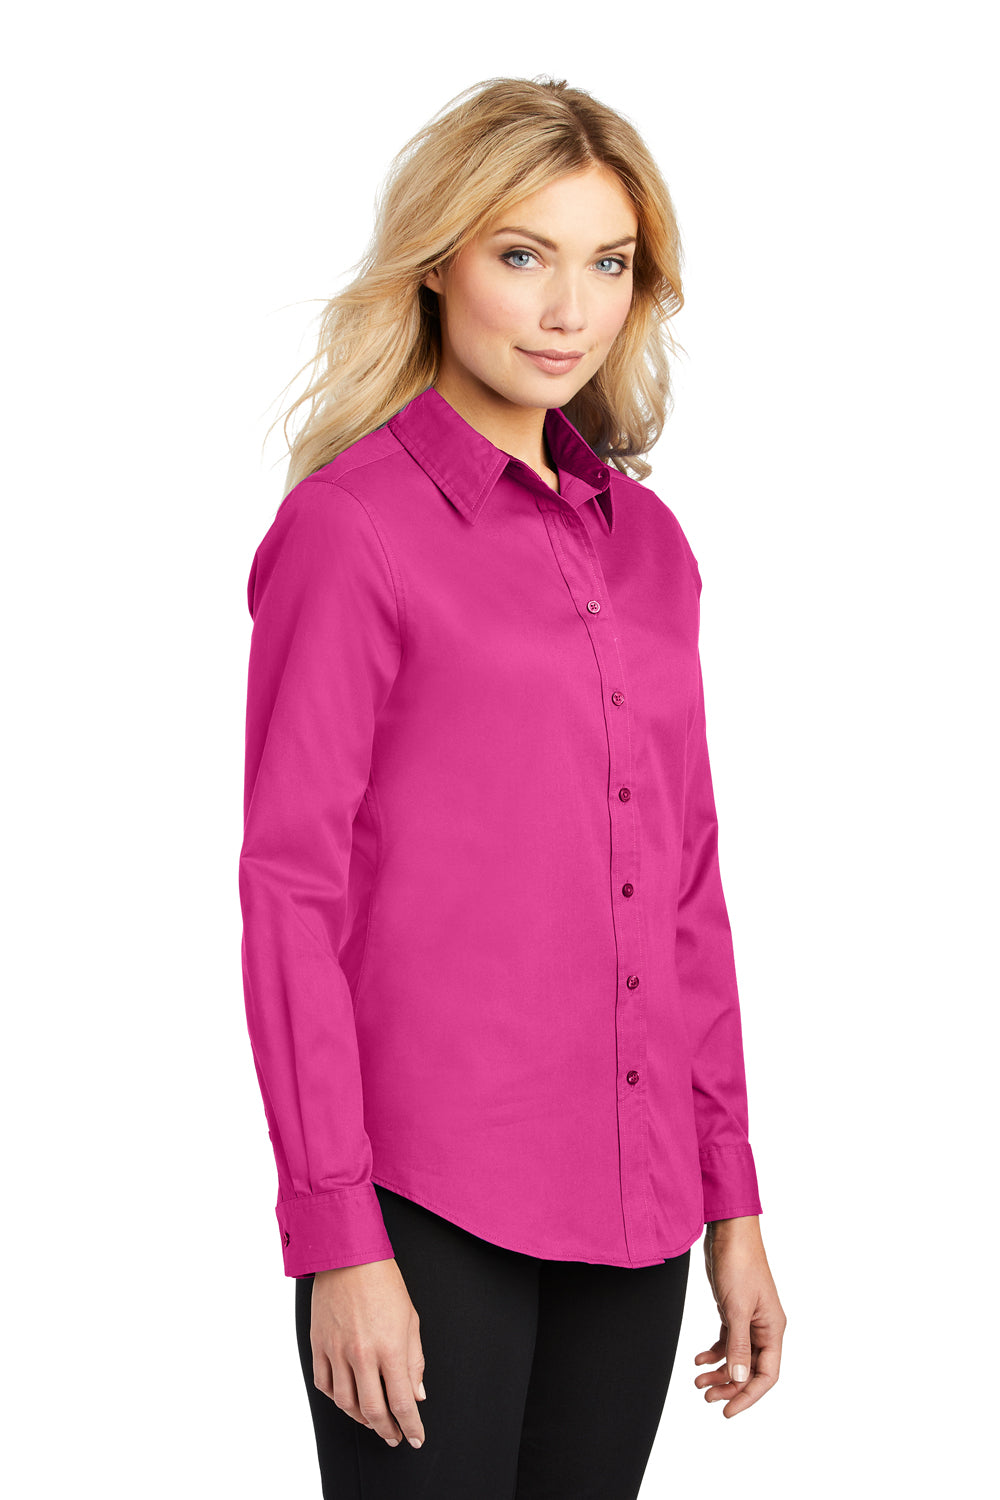 Port Authority L608 Womens Easy Care Wrinkle Resistant Long Sleeve Button Down Shirt Tropical Pink 3Q